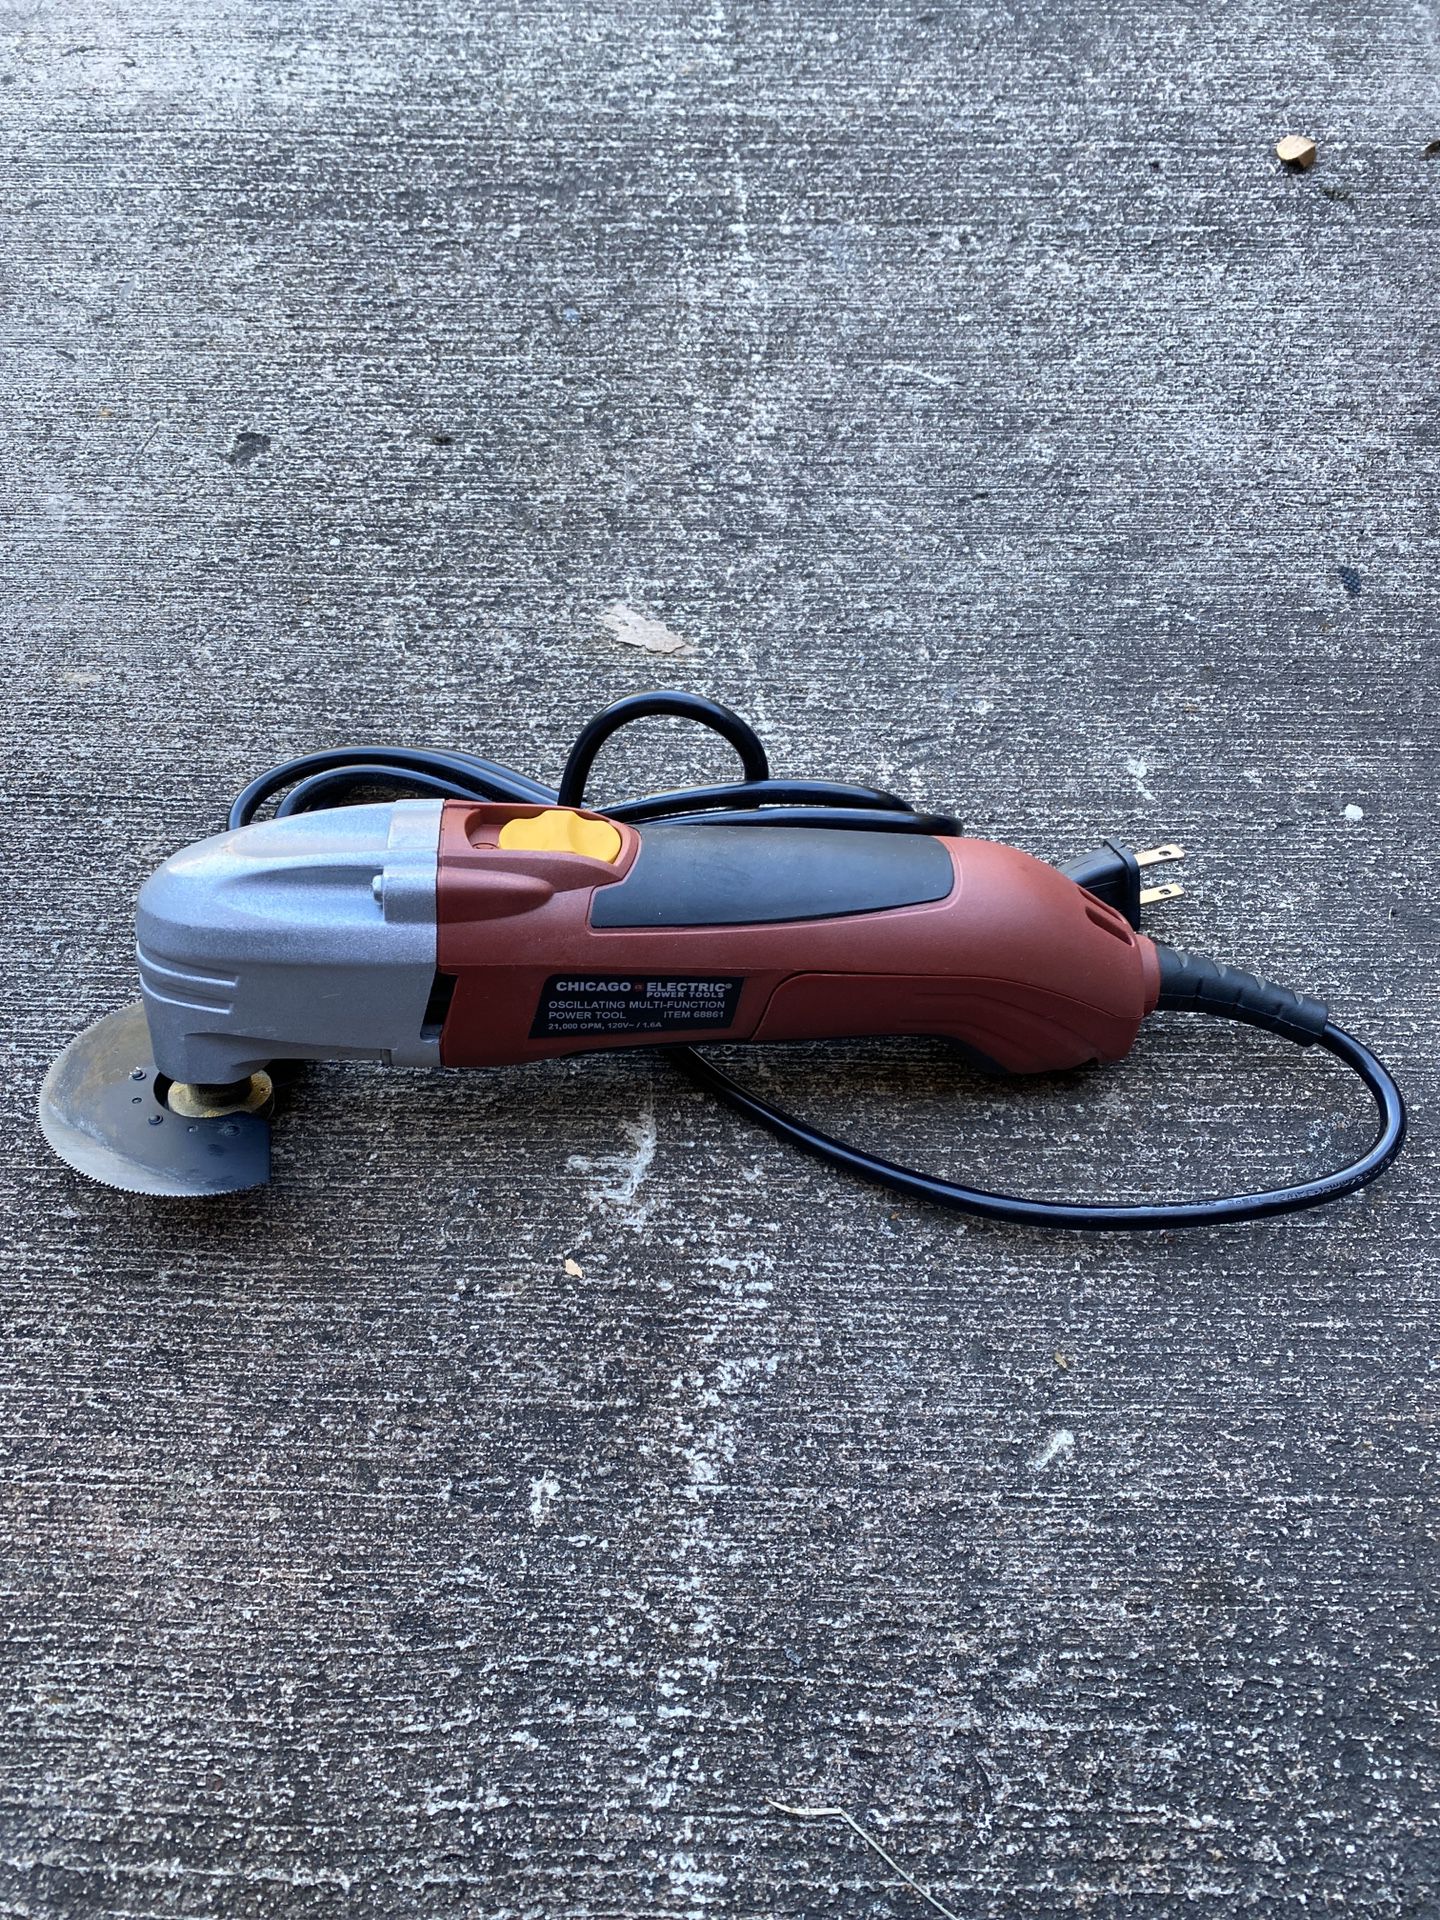 Chicago electric oscillating power tool